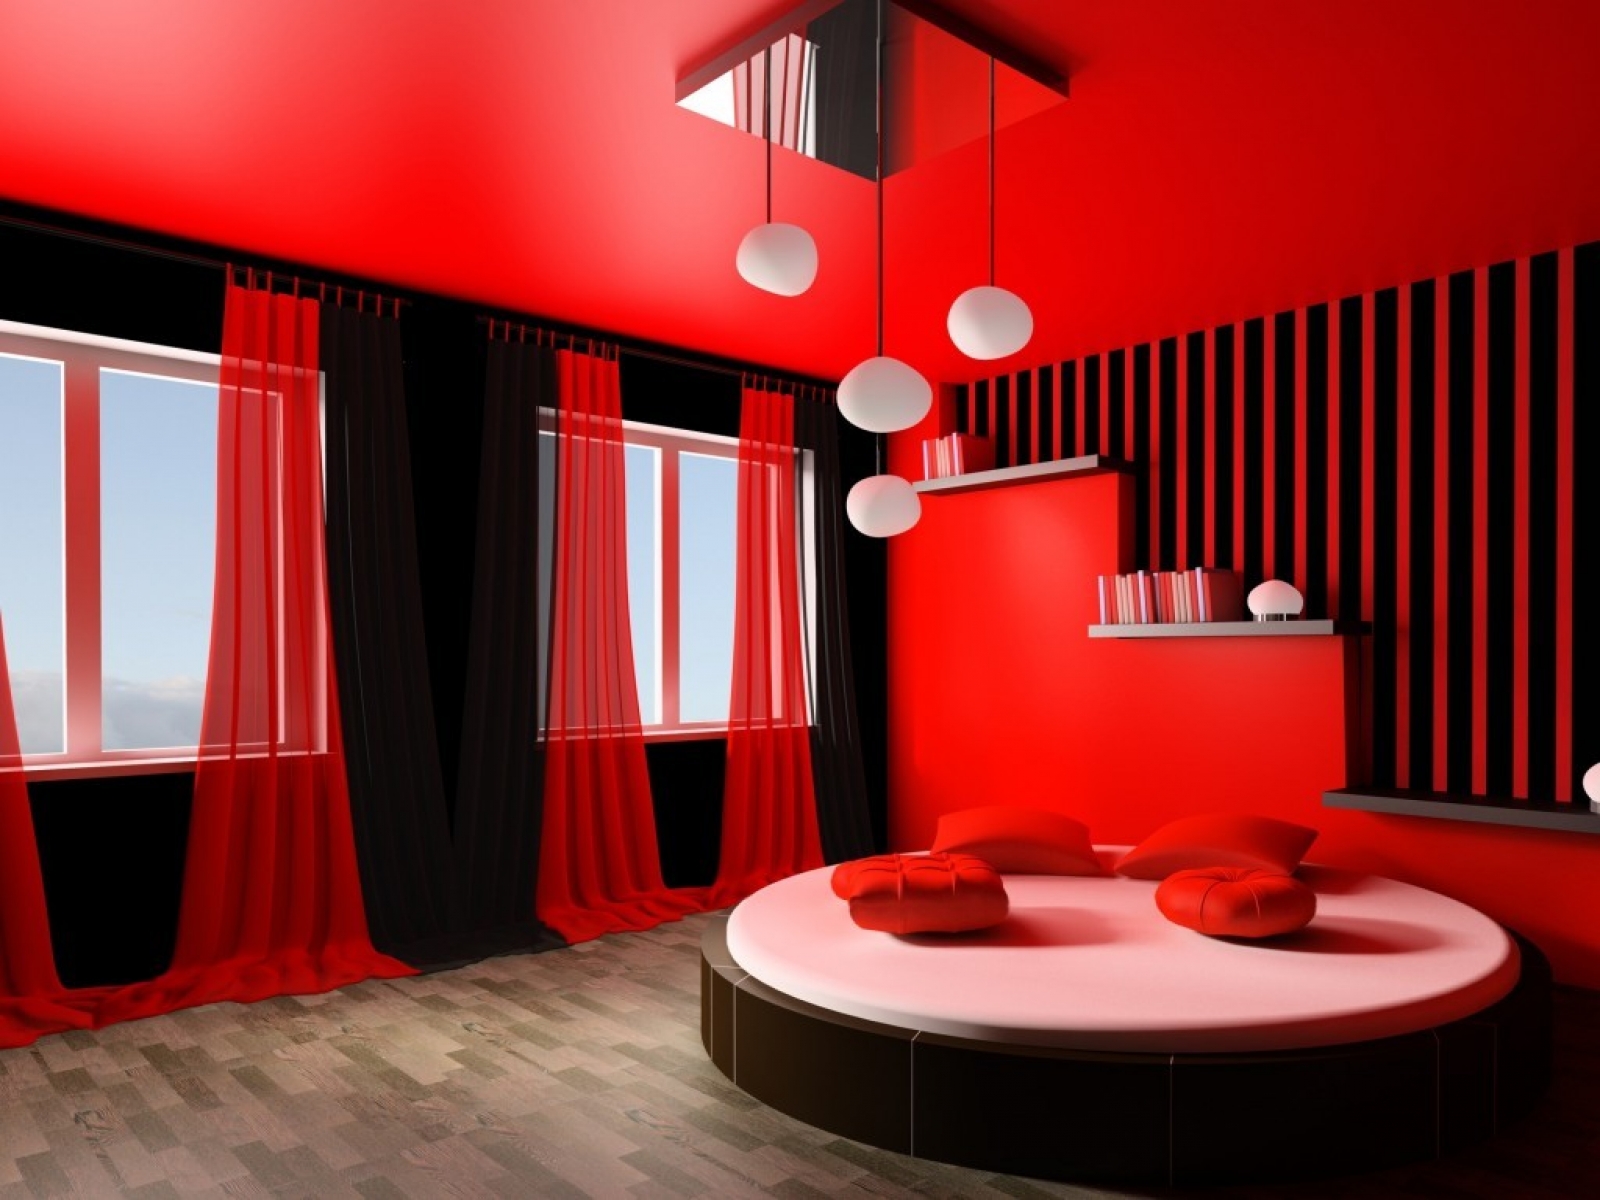 Modern Eclectic Red And Charcoal Bedroom